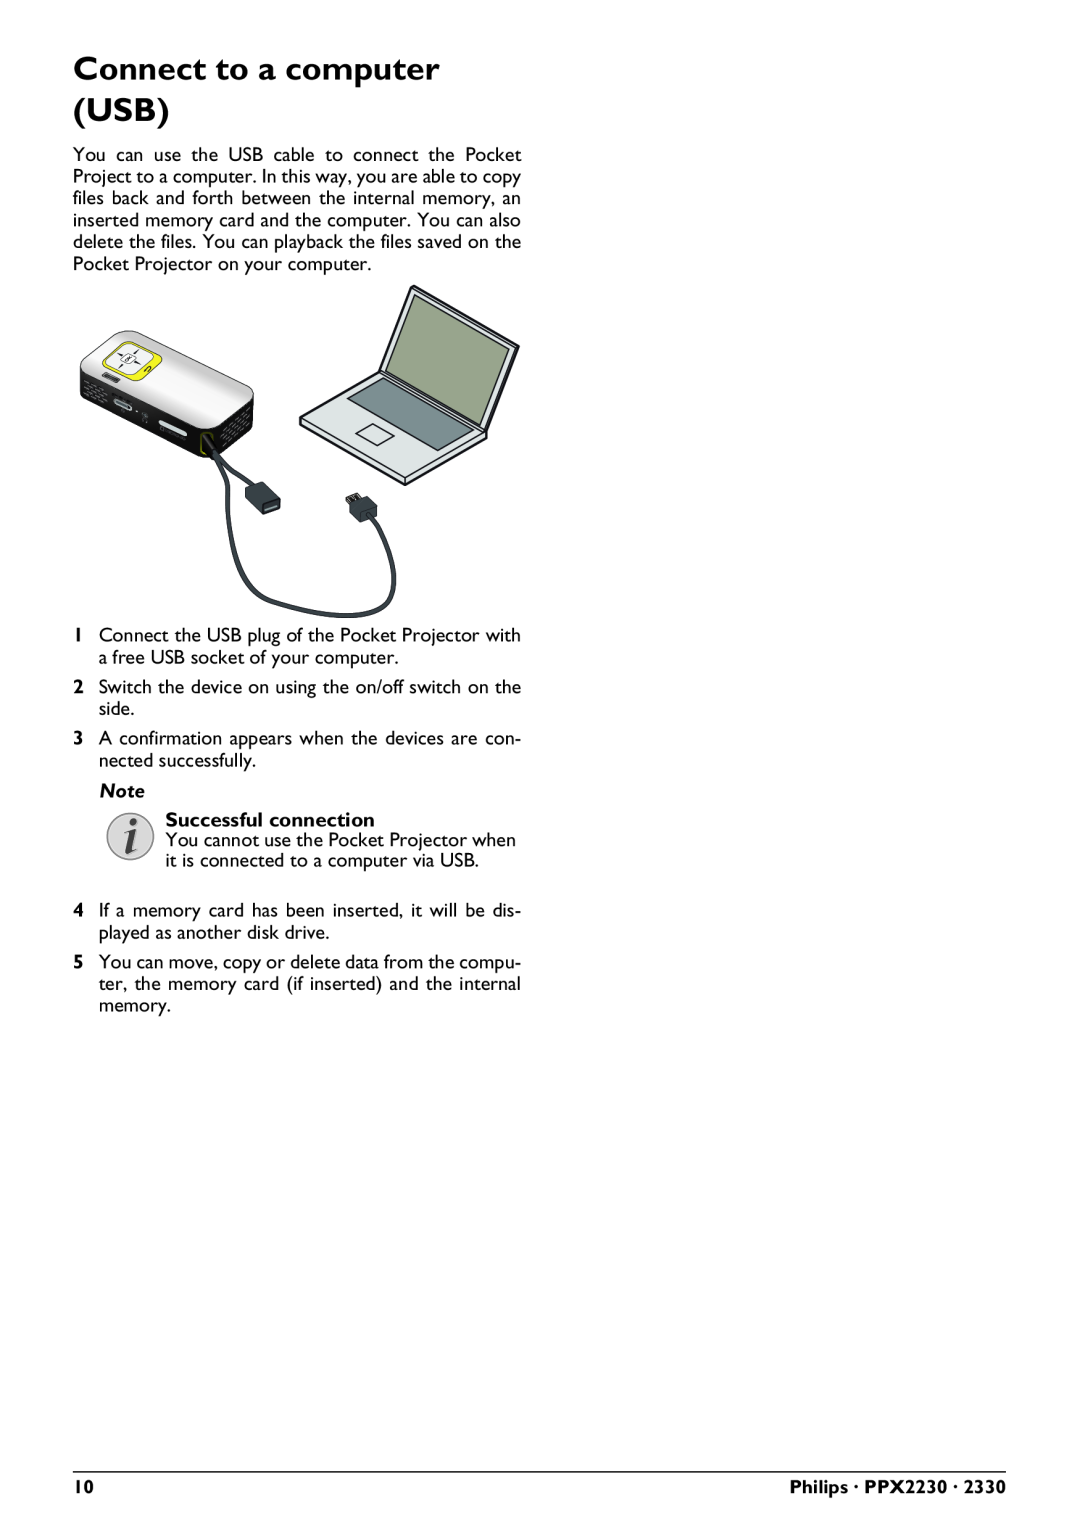 Philips PPX2330, PPX2230 user manual Connect to a computer USB, Successful connection 